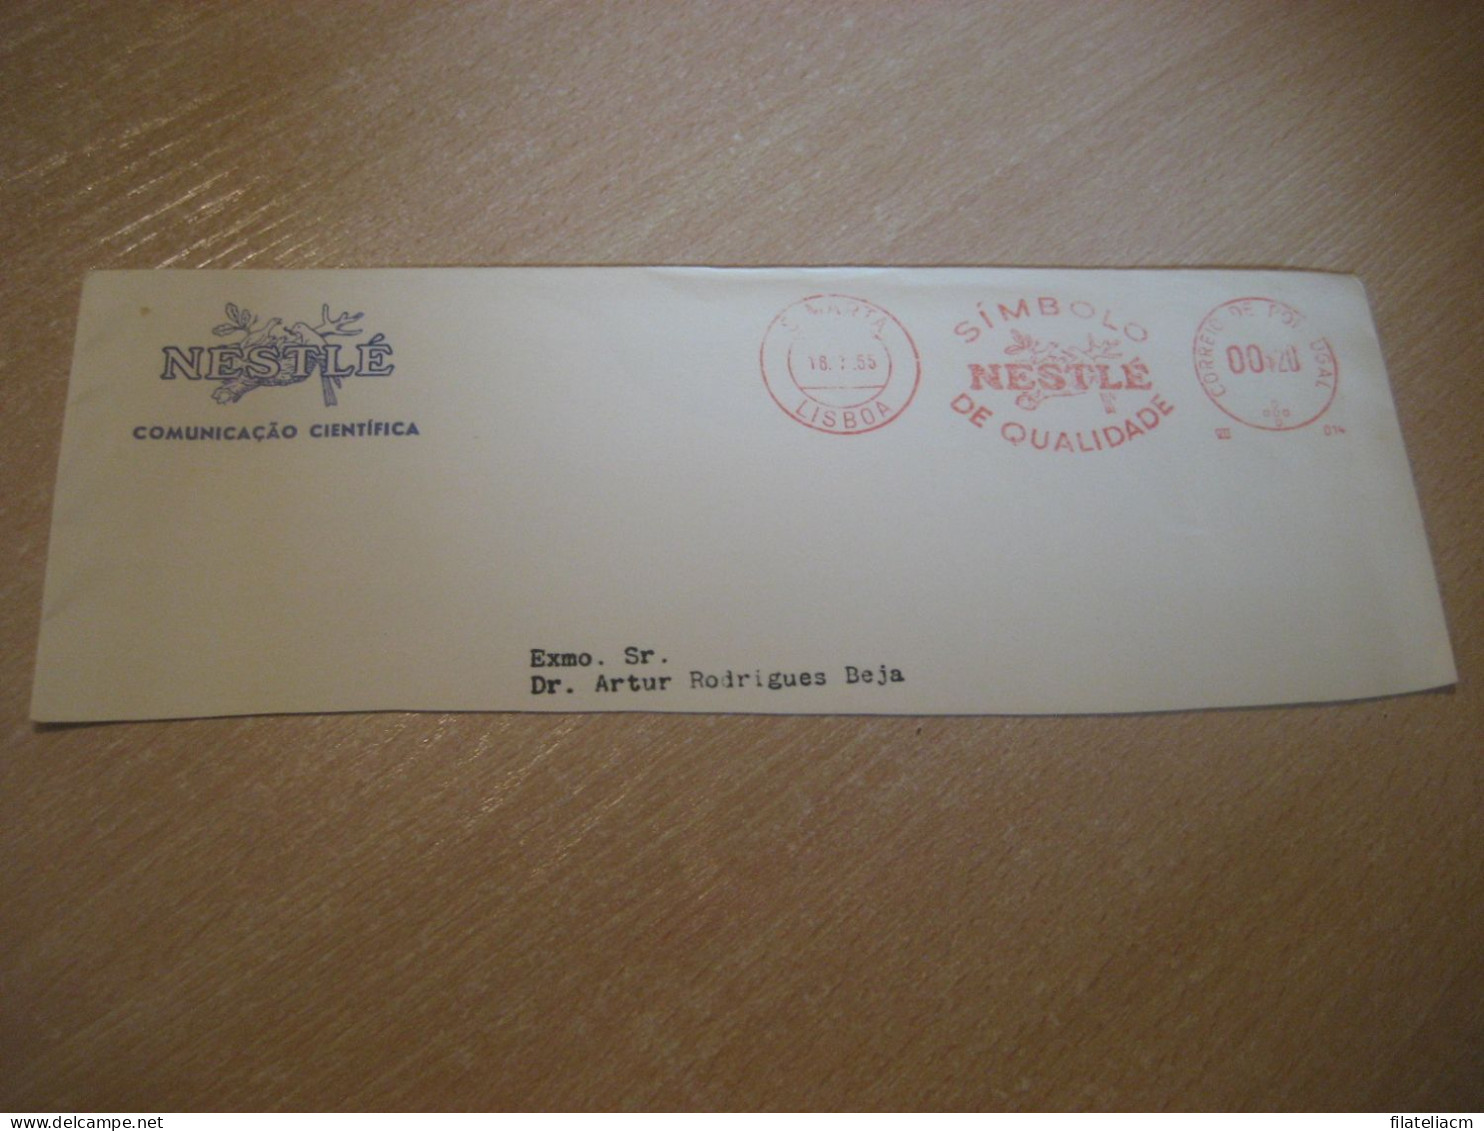 LISBOA 1955 Nestle Meter Mail Cancel Cut Cuted Cover PORTUGAL - Covers & Documents